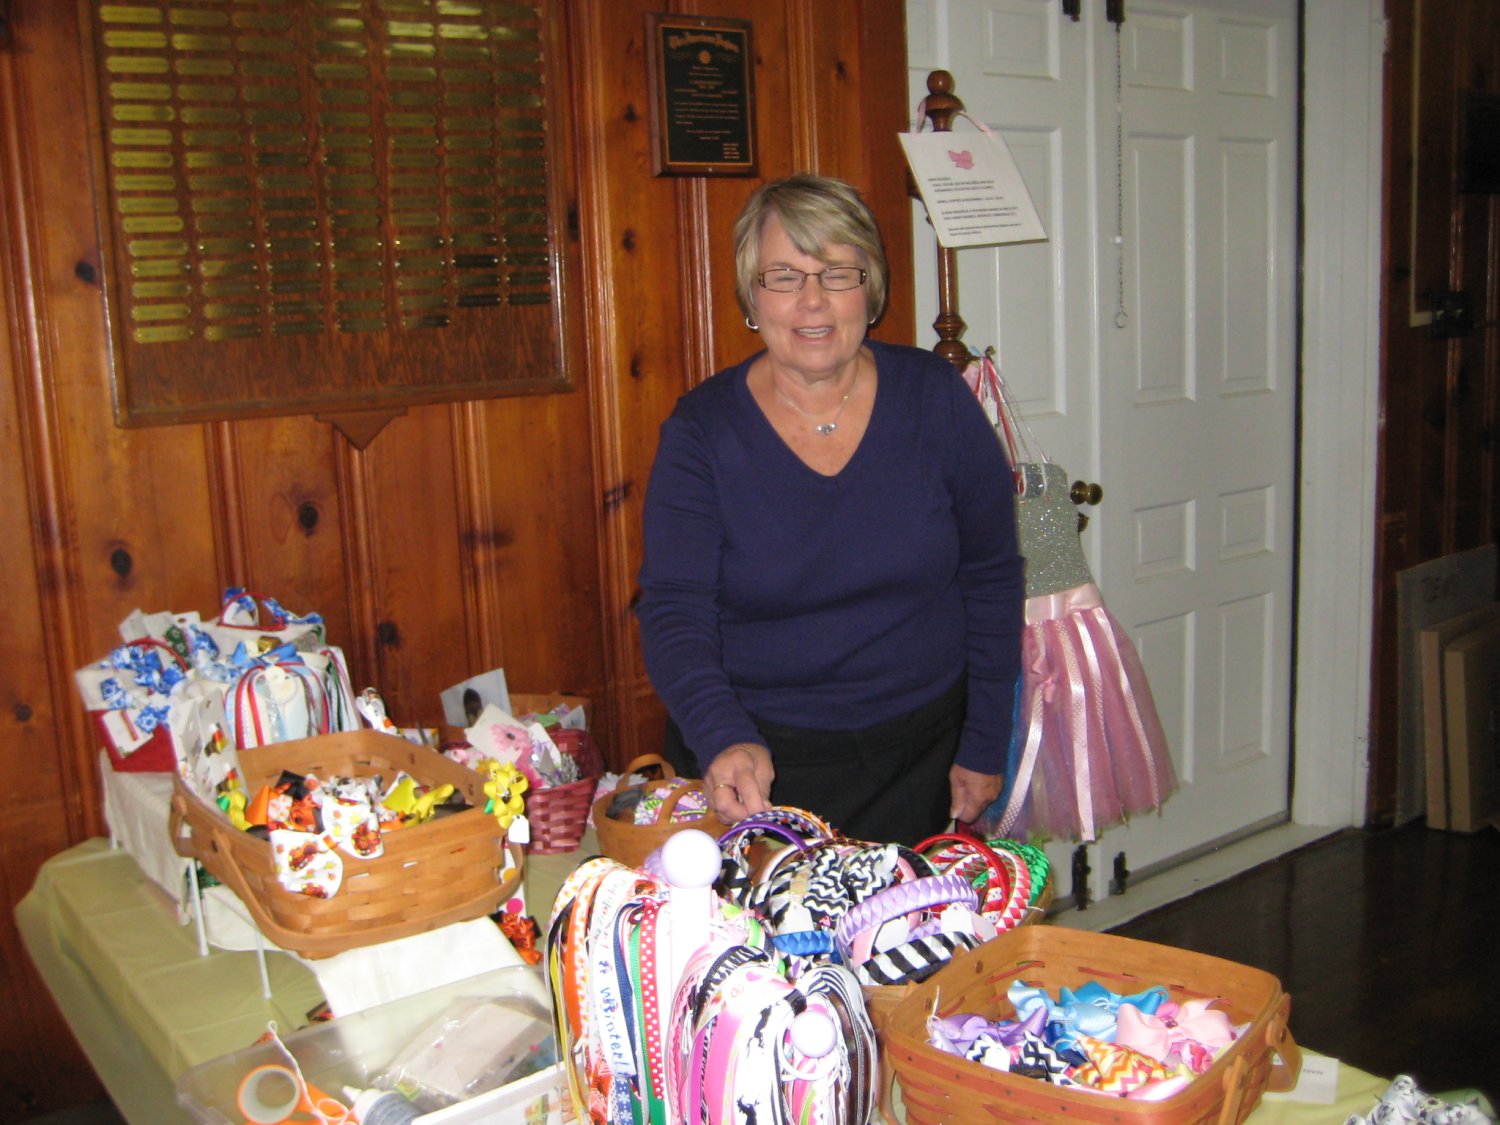  Pat Kindle offered lots and lots of handcrafted children's bows, bow holders, headbands, pony tail holders, flower clips, and more.  